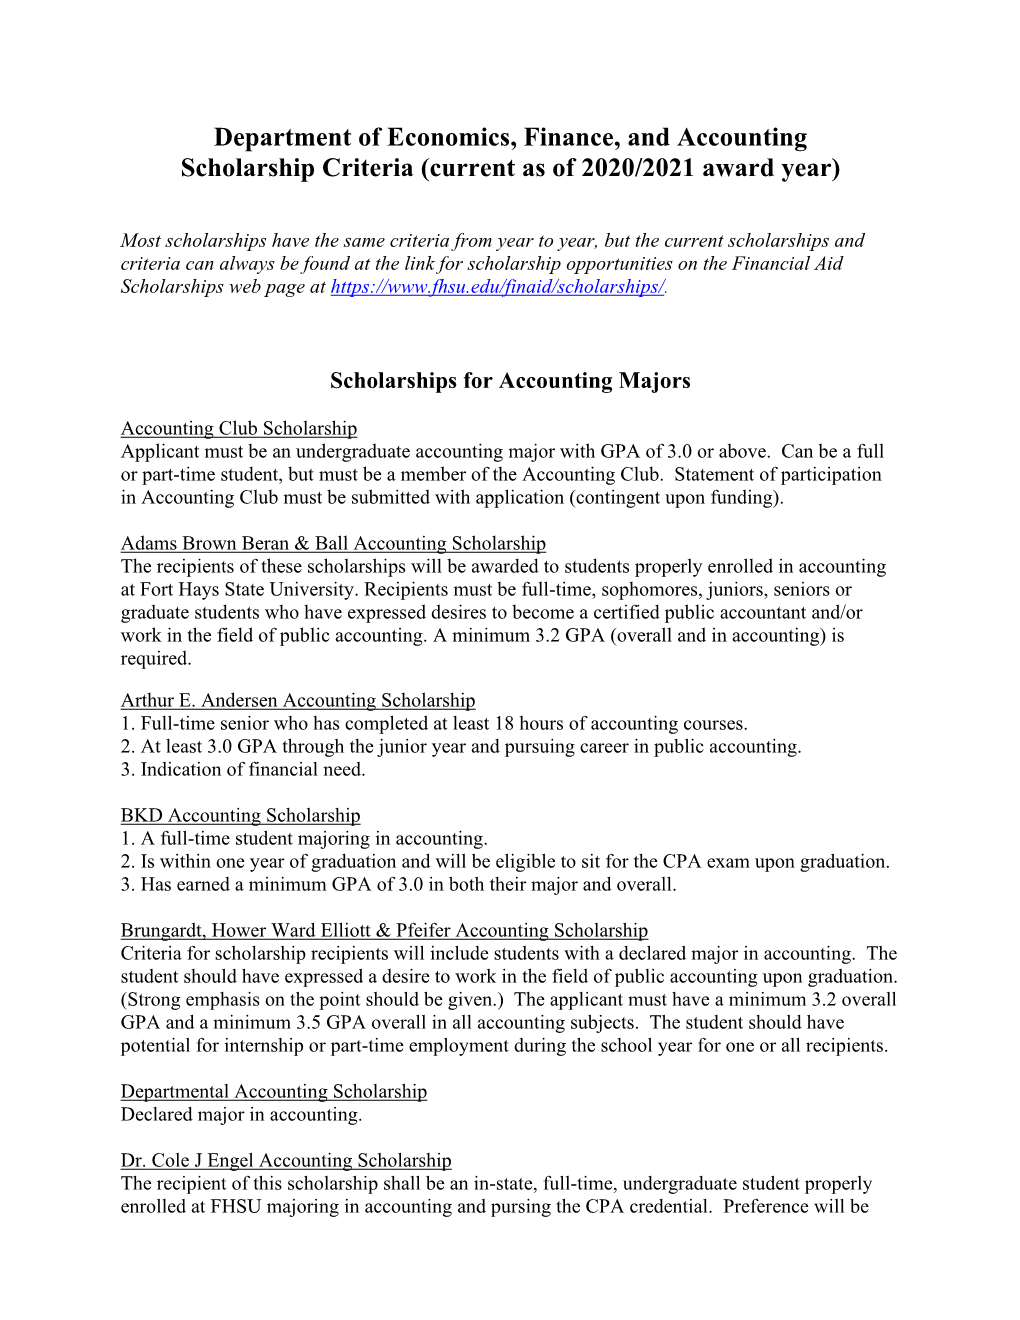 Department of Economics, Finance, and Accounting Scholarship Criteria (Current As of 2020/2021 Award Year)